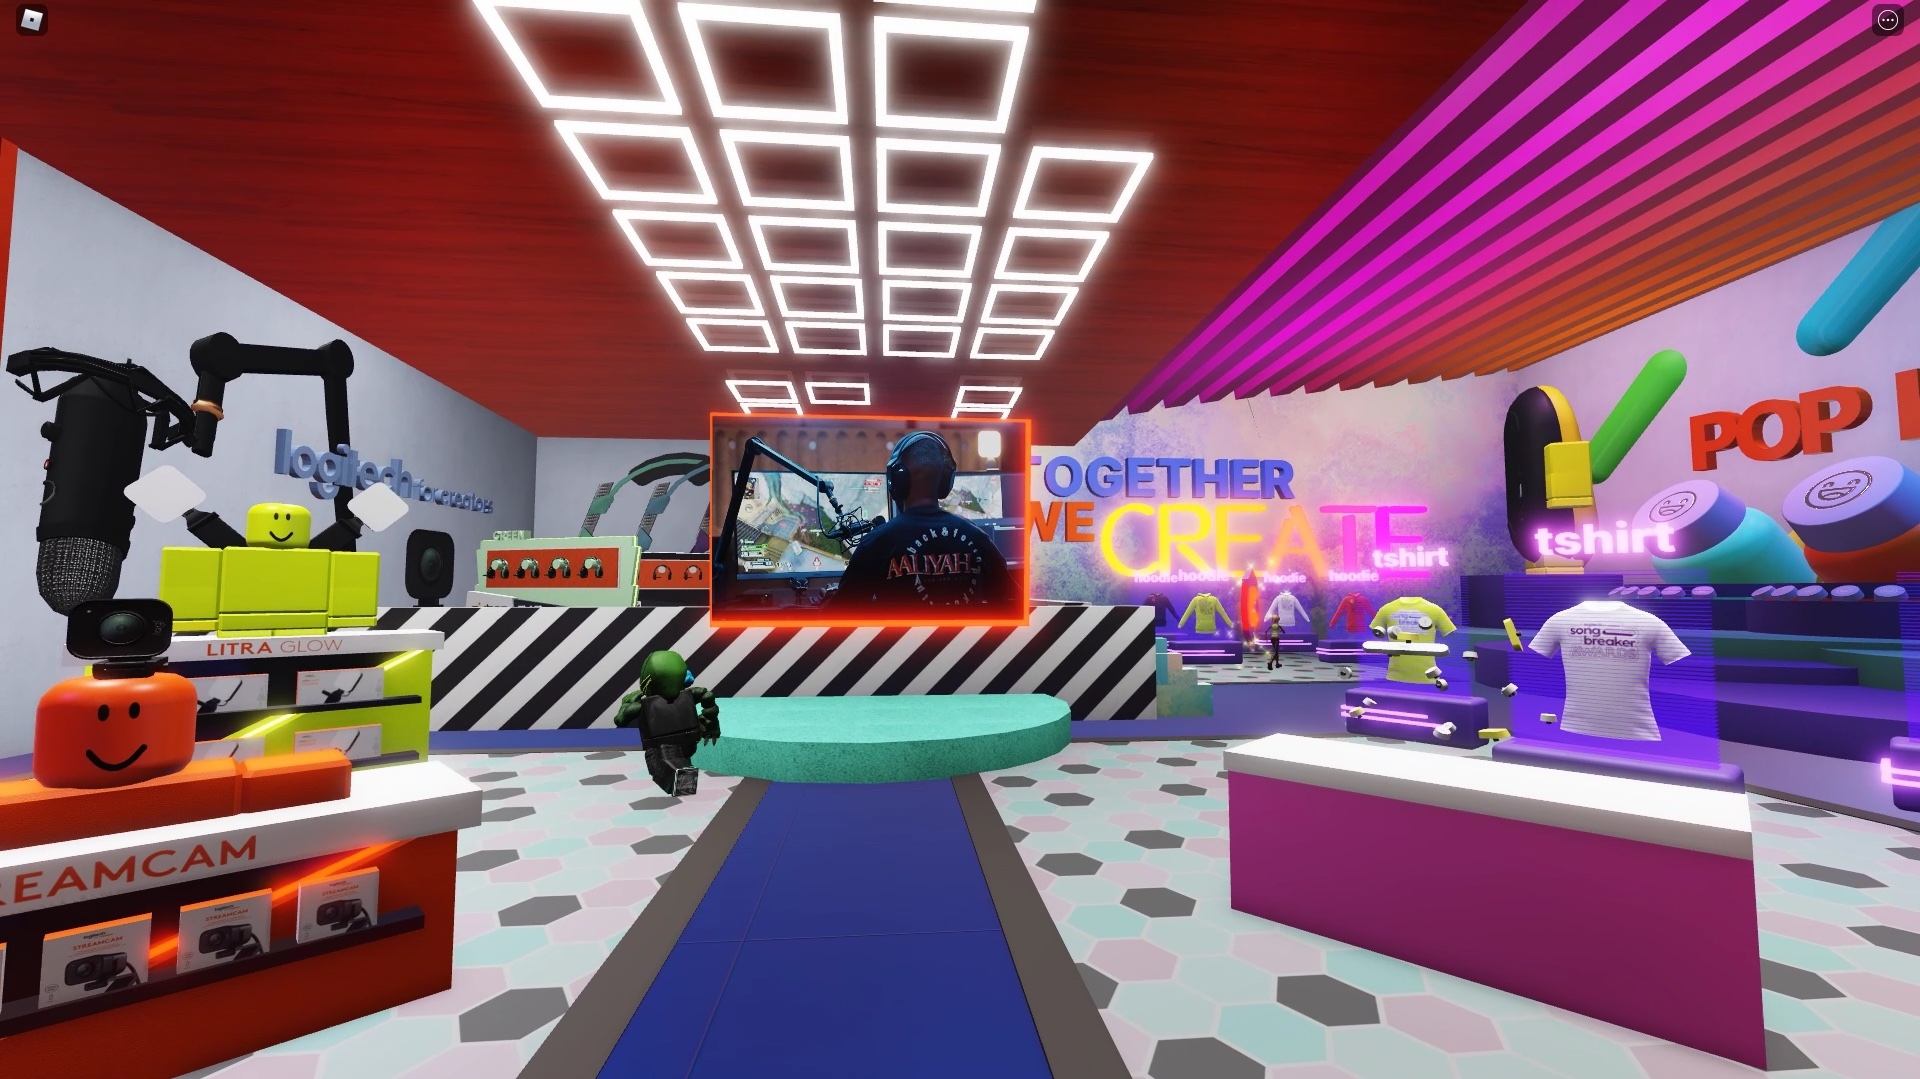 Roblox Set the Stage for Grammys Sparkling Entrance in the Metaverse